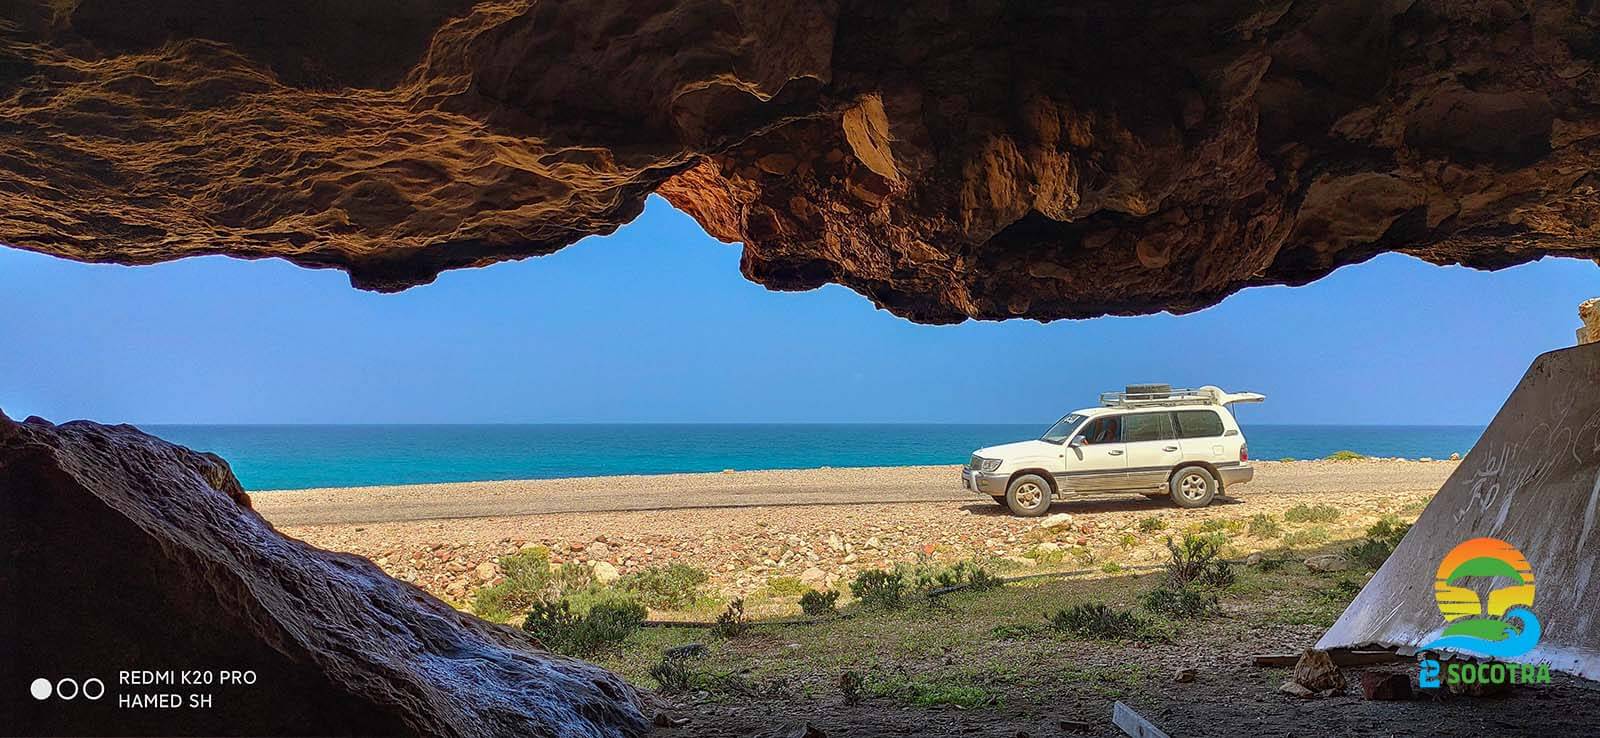 Get Ready! 10 Easy Points You Need to Know Before Travel to Socotra Island